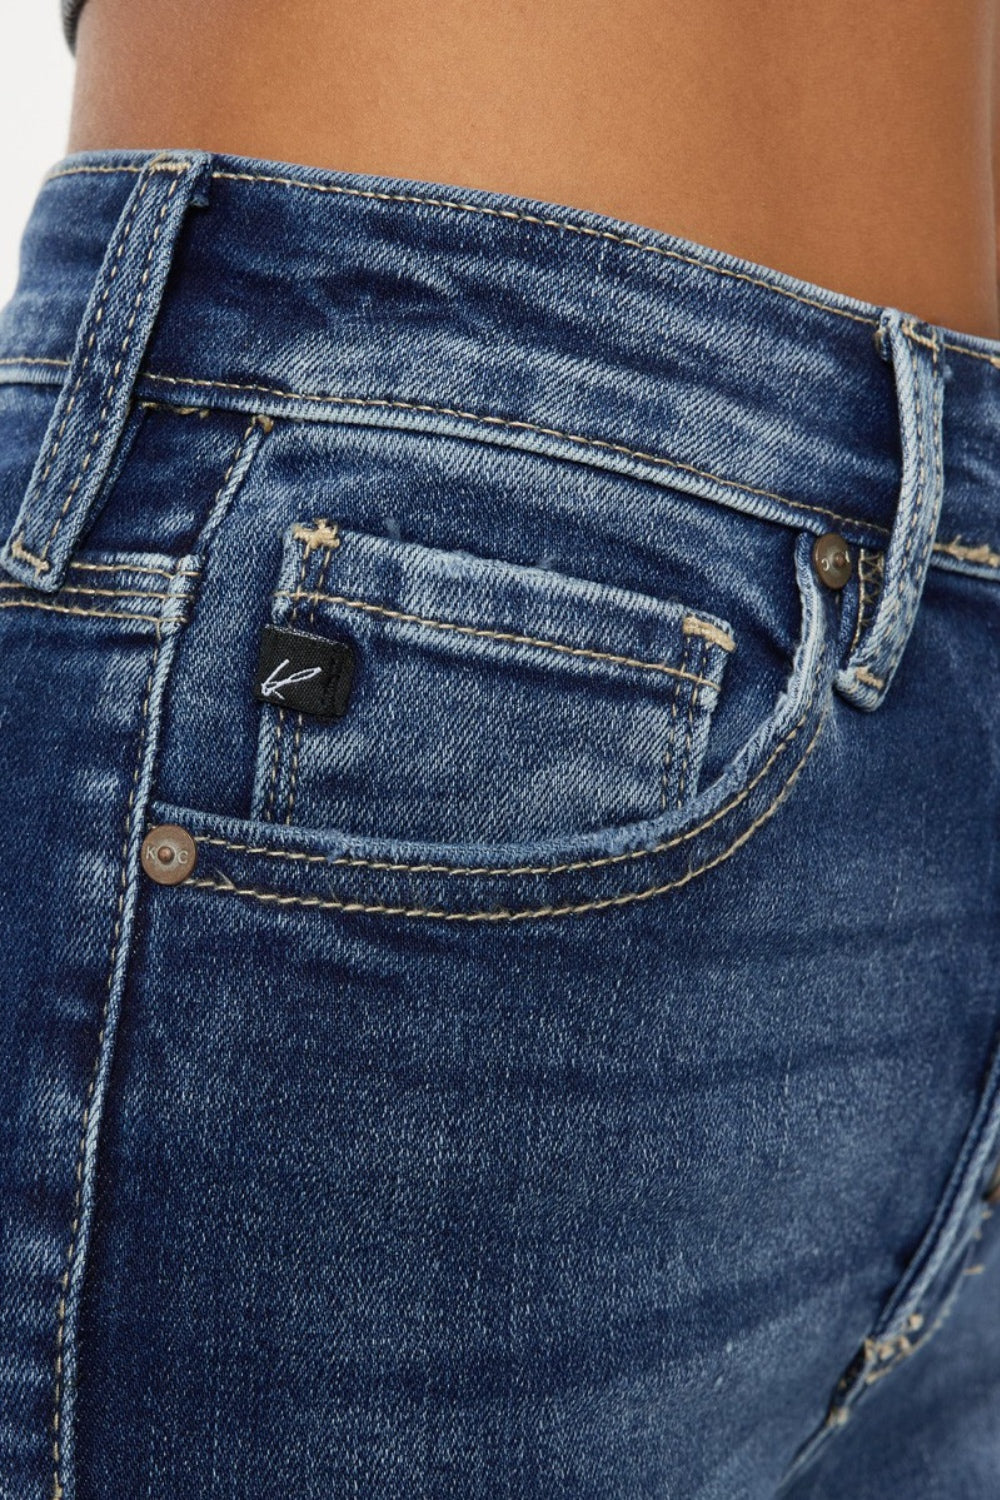 Shop Kancan Denim Shorts with cat's whiskers detail, a stylish button fly, and a versatile fit. Perfect for summer days and nights outShop Kancan Denim Shorts with cat's whiskers detail, a stylish button fly, and a versatile fit. Perfect for summer days and nights out